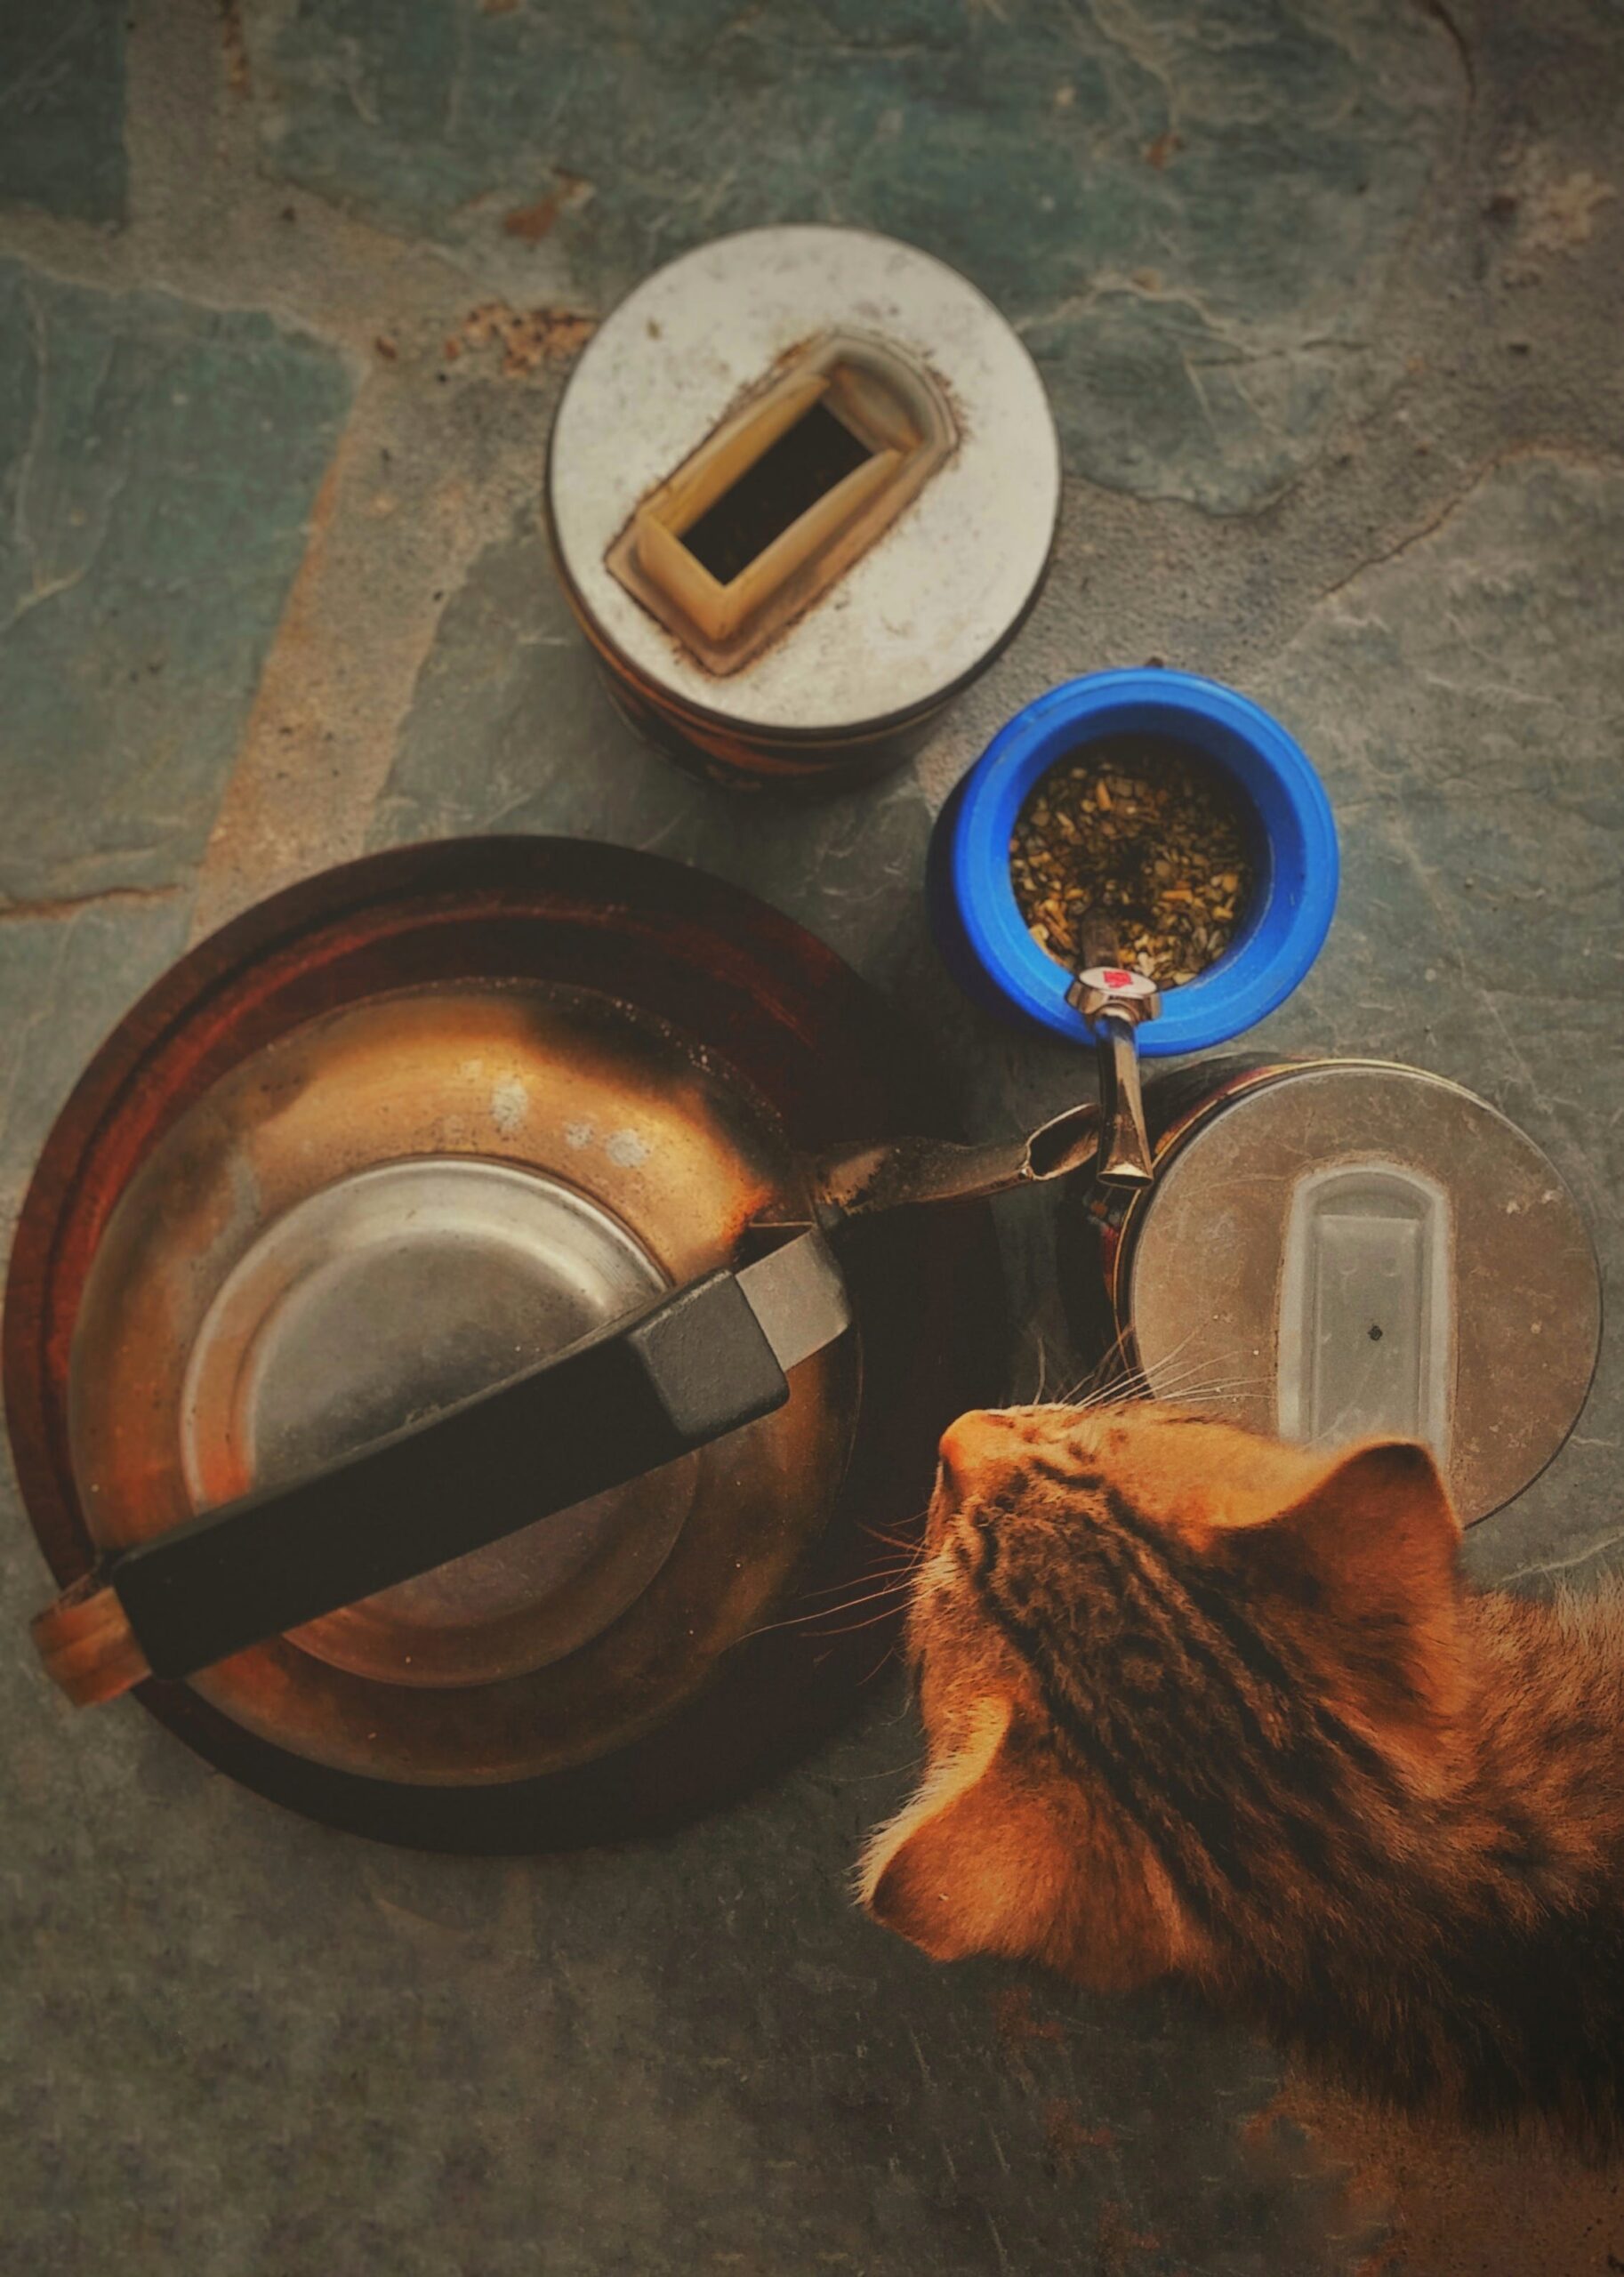 A cat eagerly savoring homemade treats crafted from the delightful guide on feline culinary adventures.